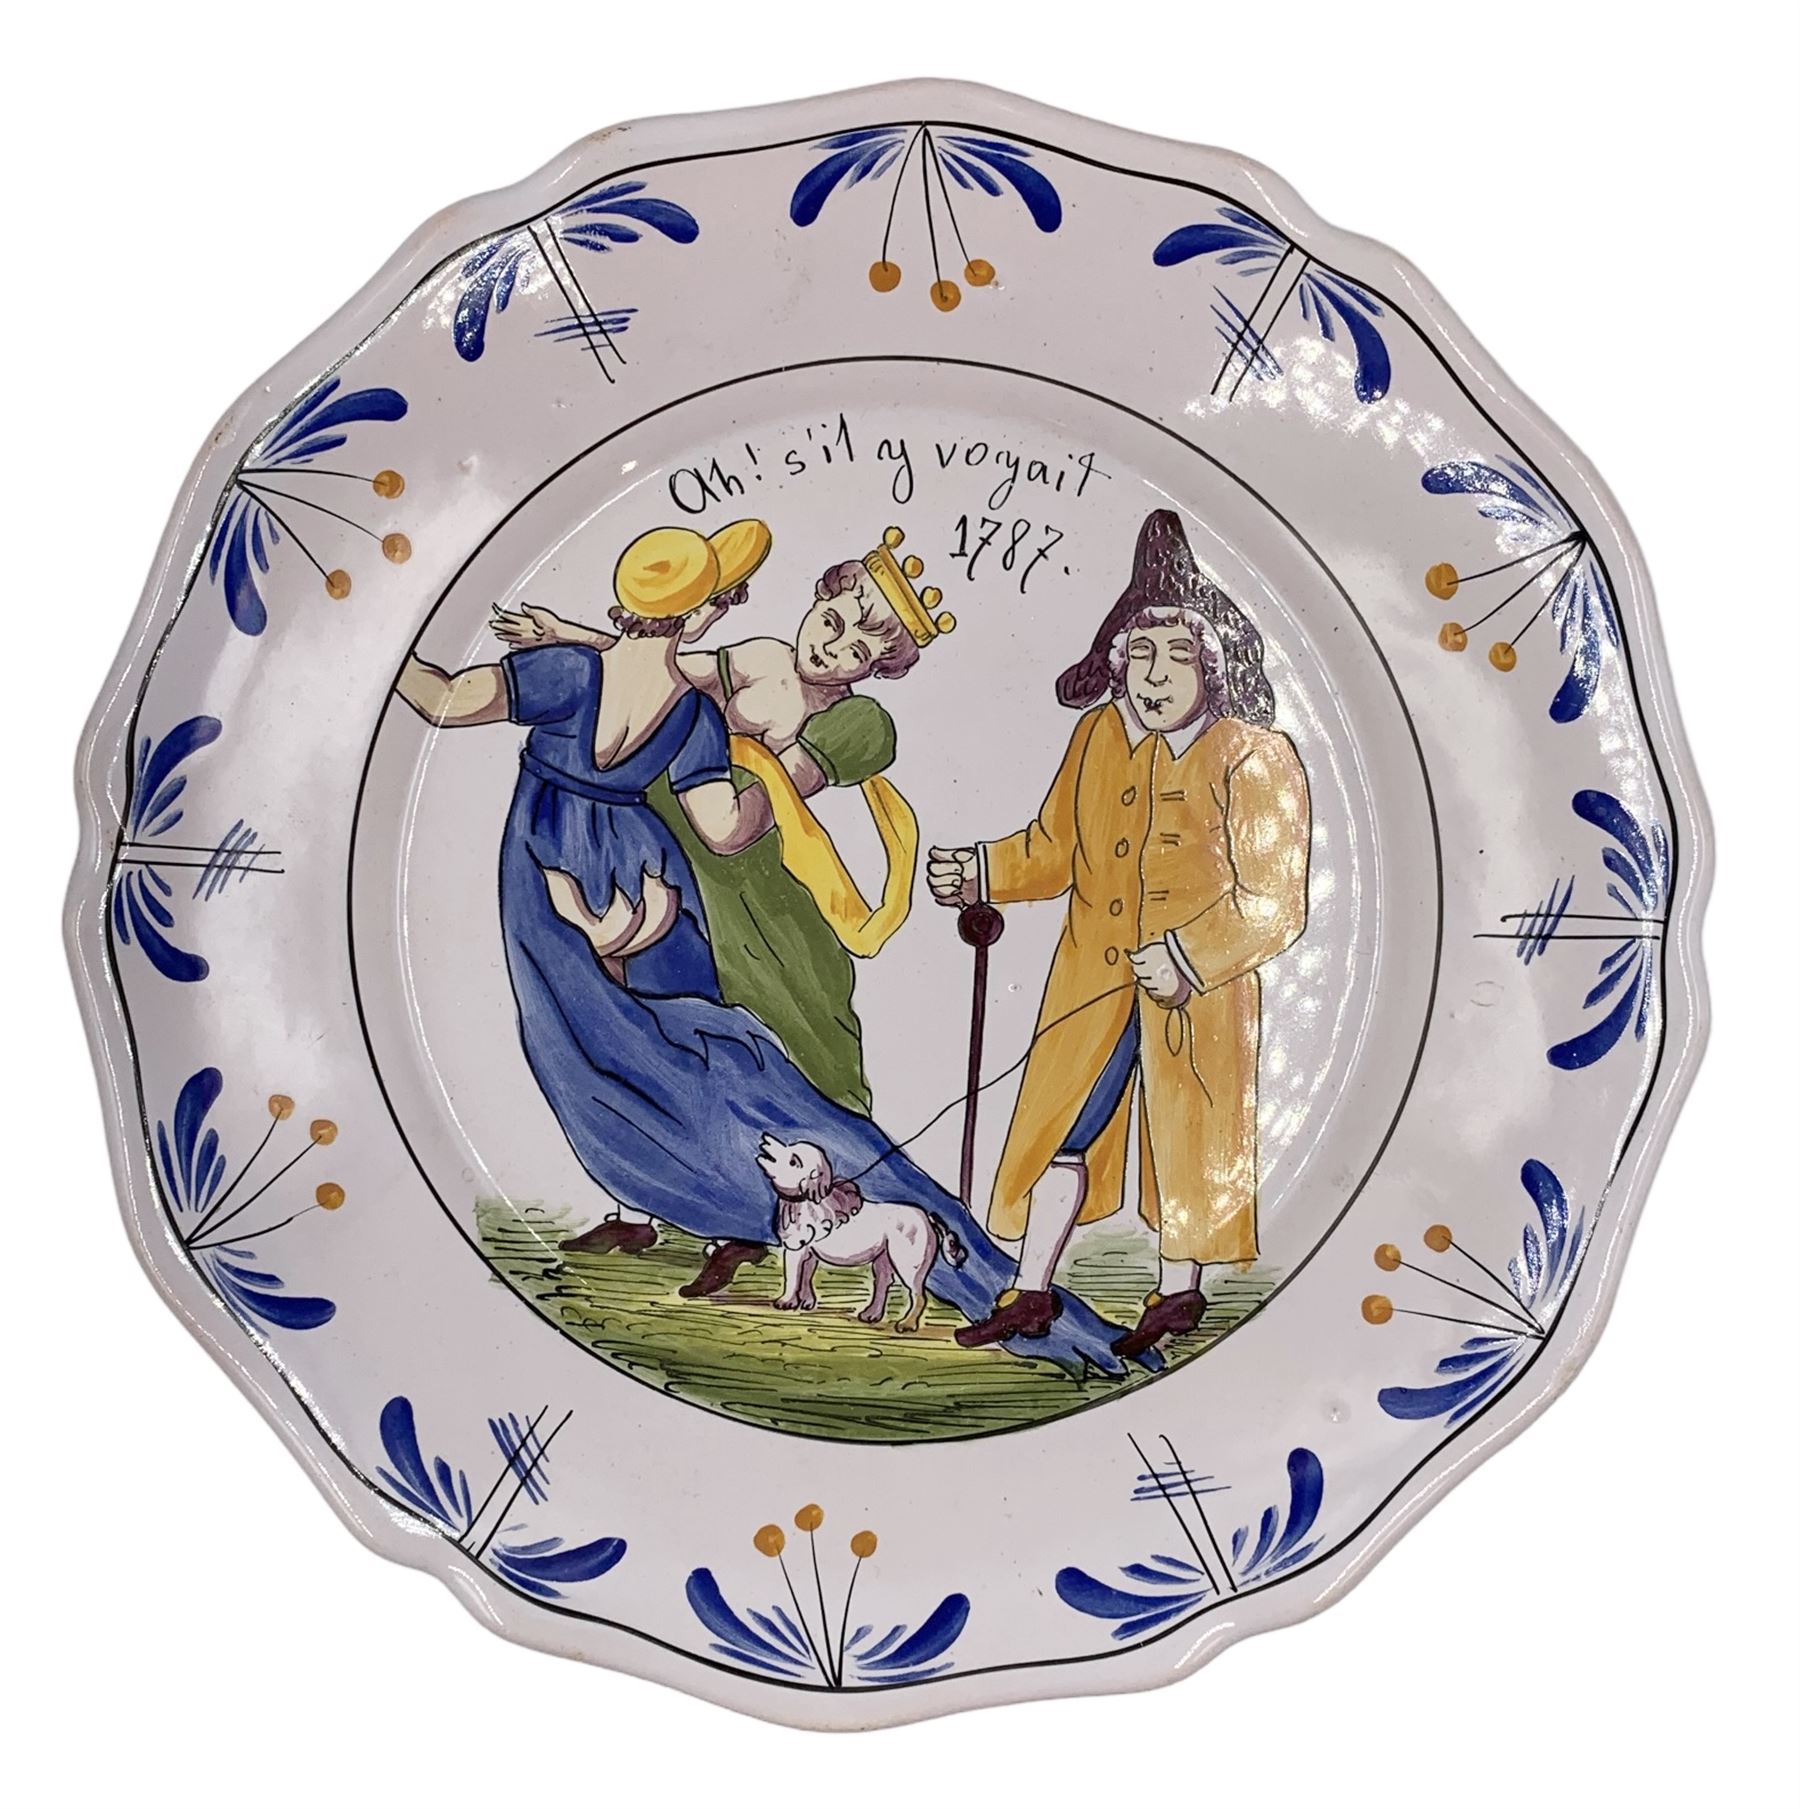 Seven 18th century style French Faience revolution commemorative plates - Image 4 of 32